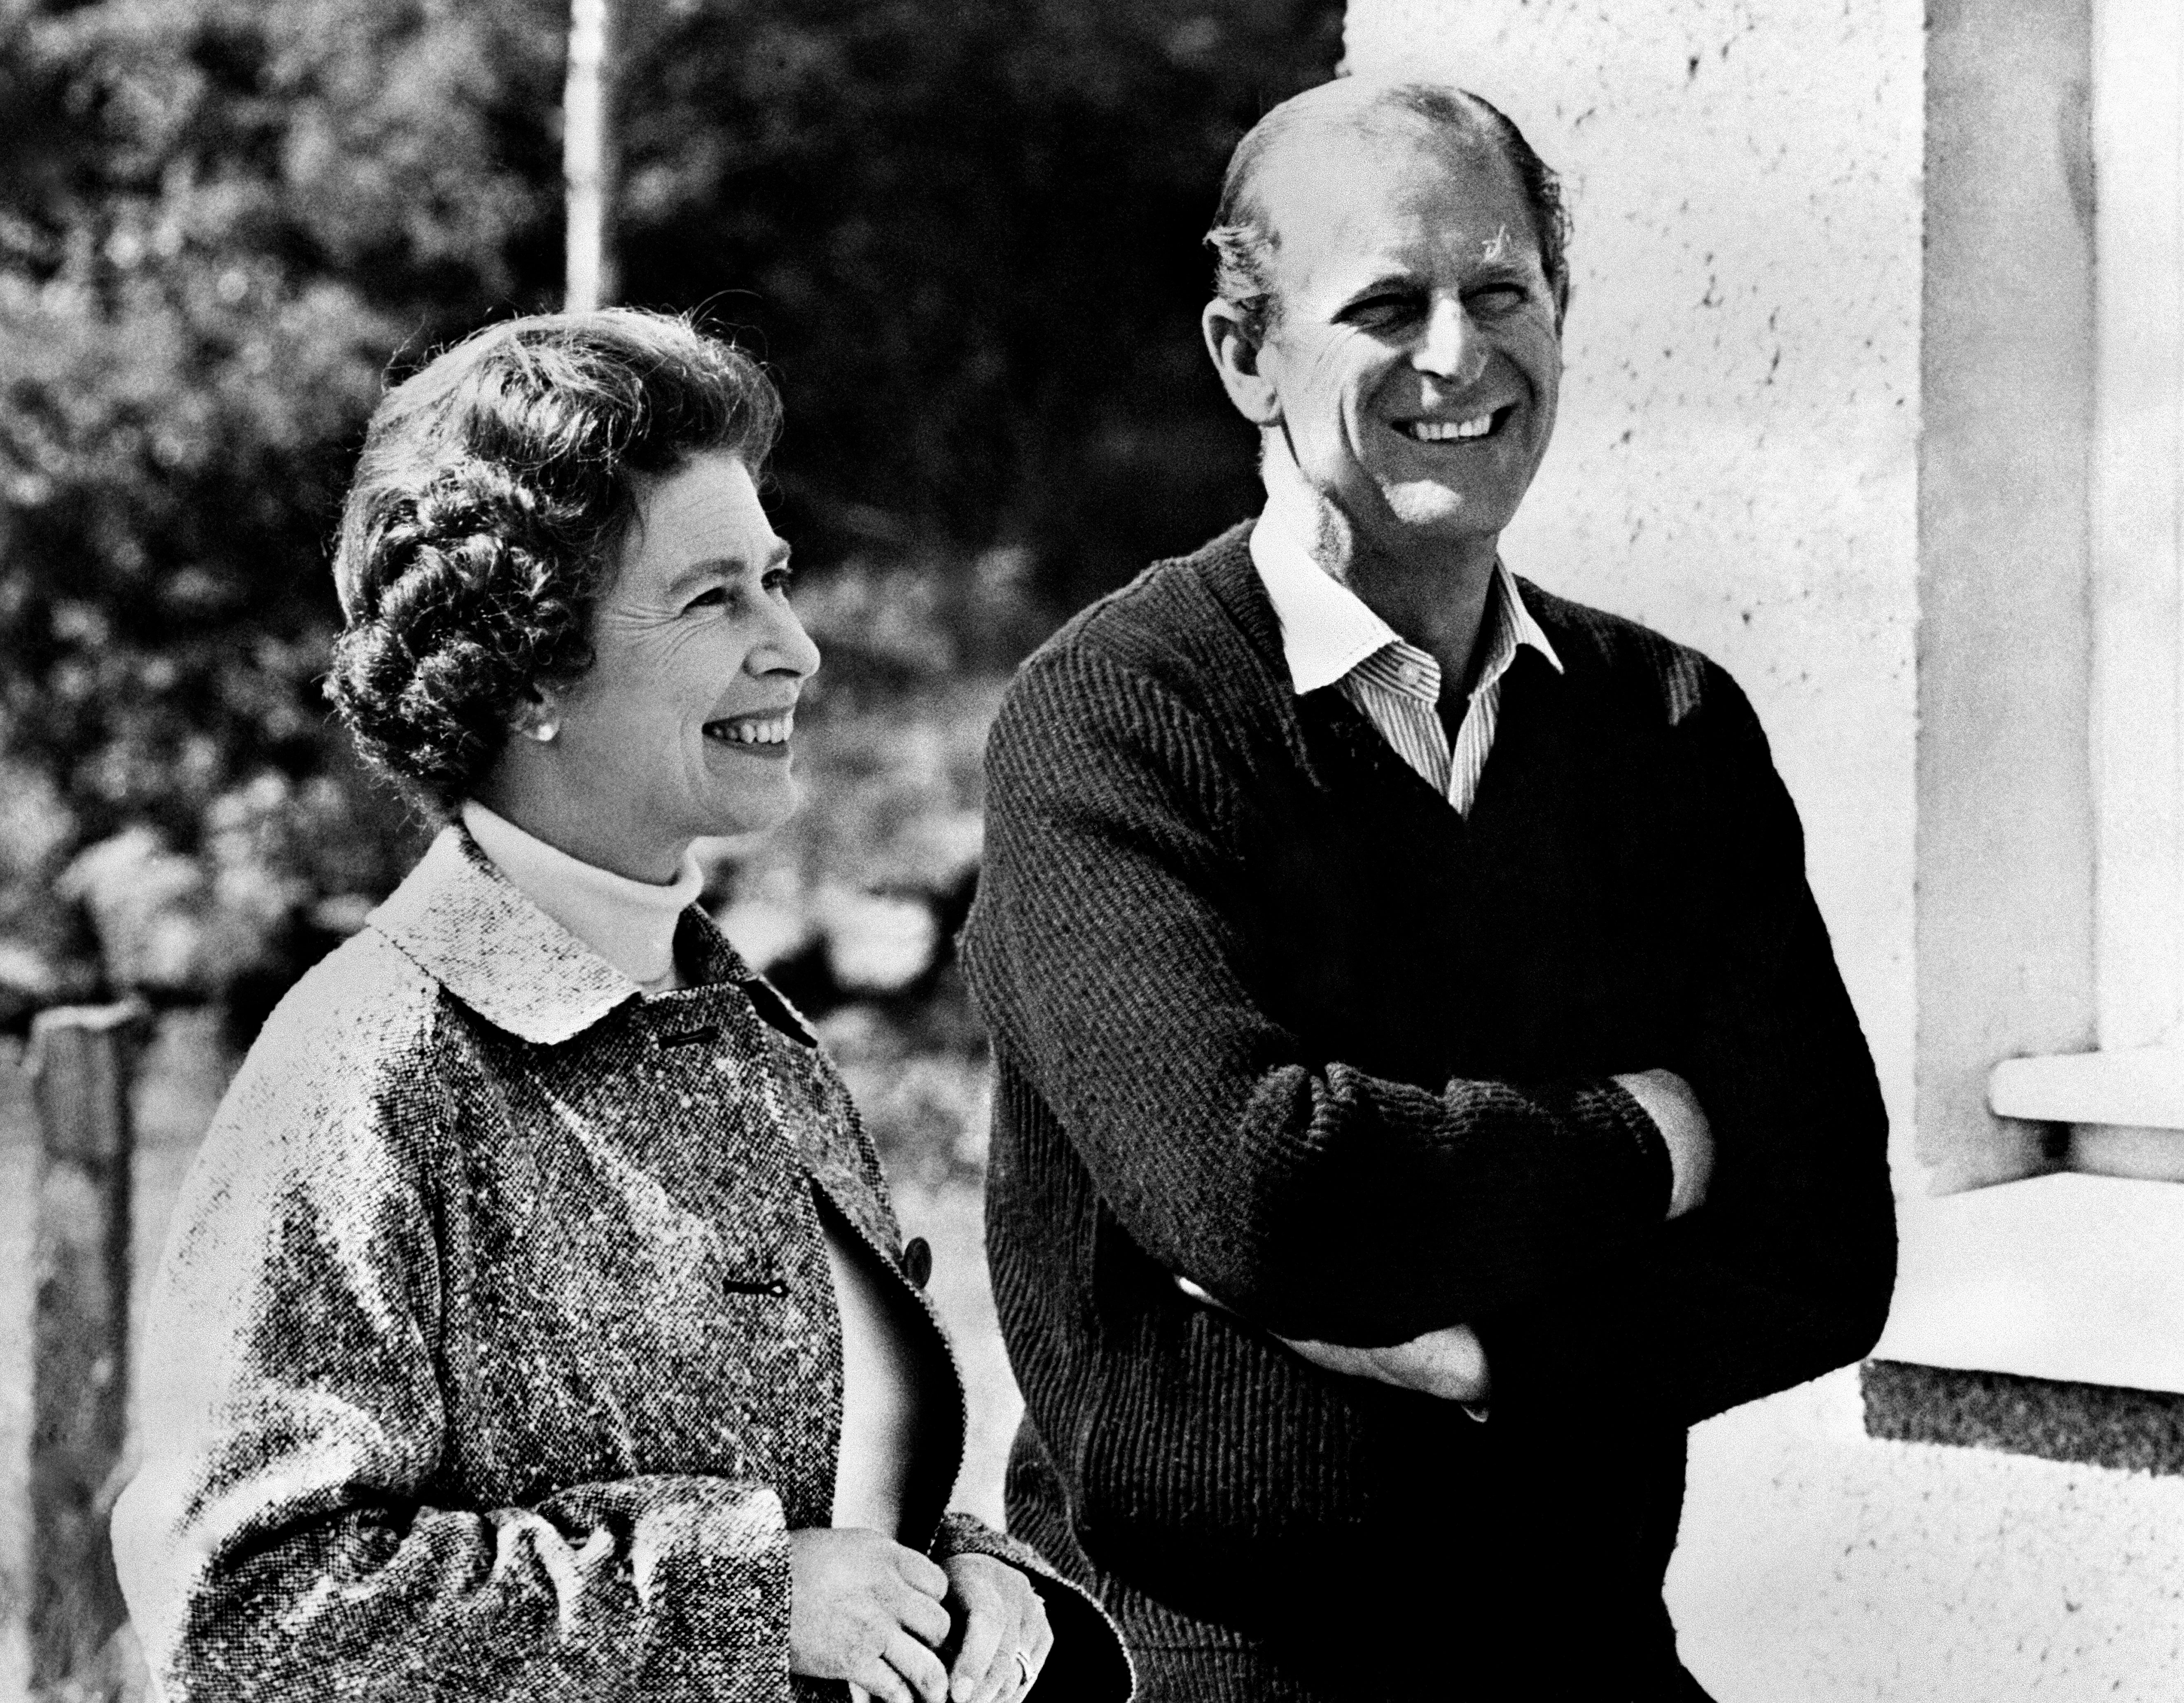 Queen Elizabeth II and Prince Philip, Duke of Edinburgh, pose at Balmoral Castle, near the village of Crathie in Aberdeenshire, on October 31, 1972